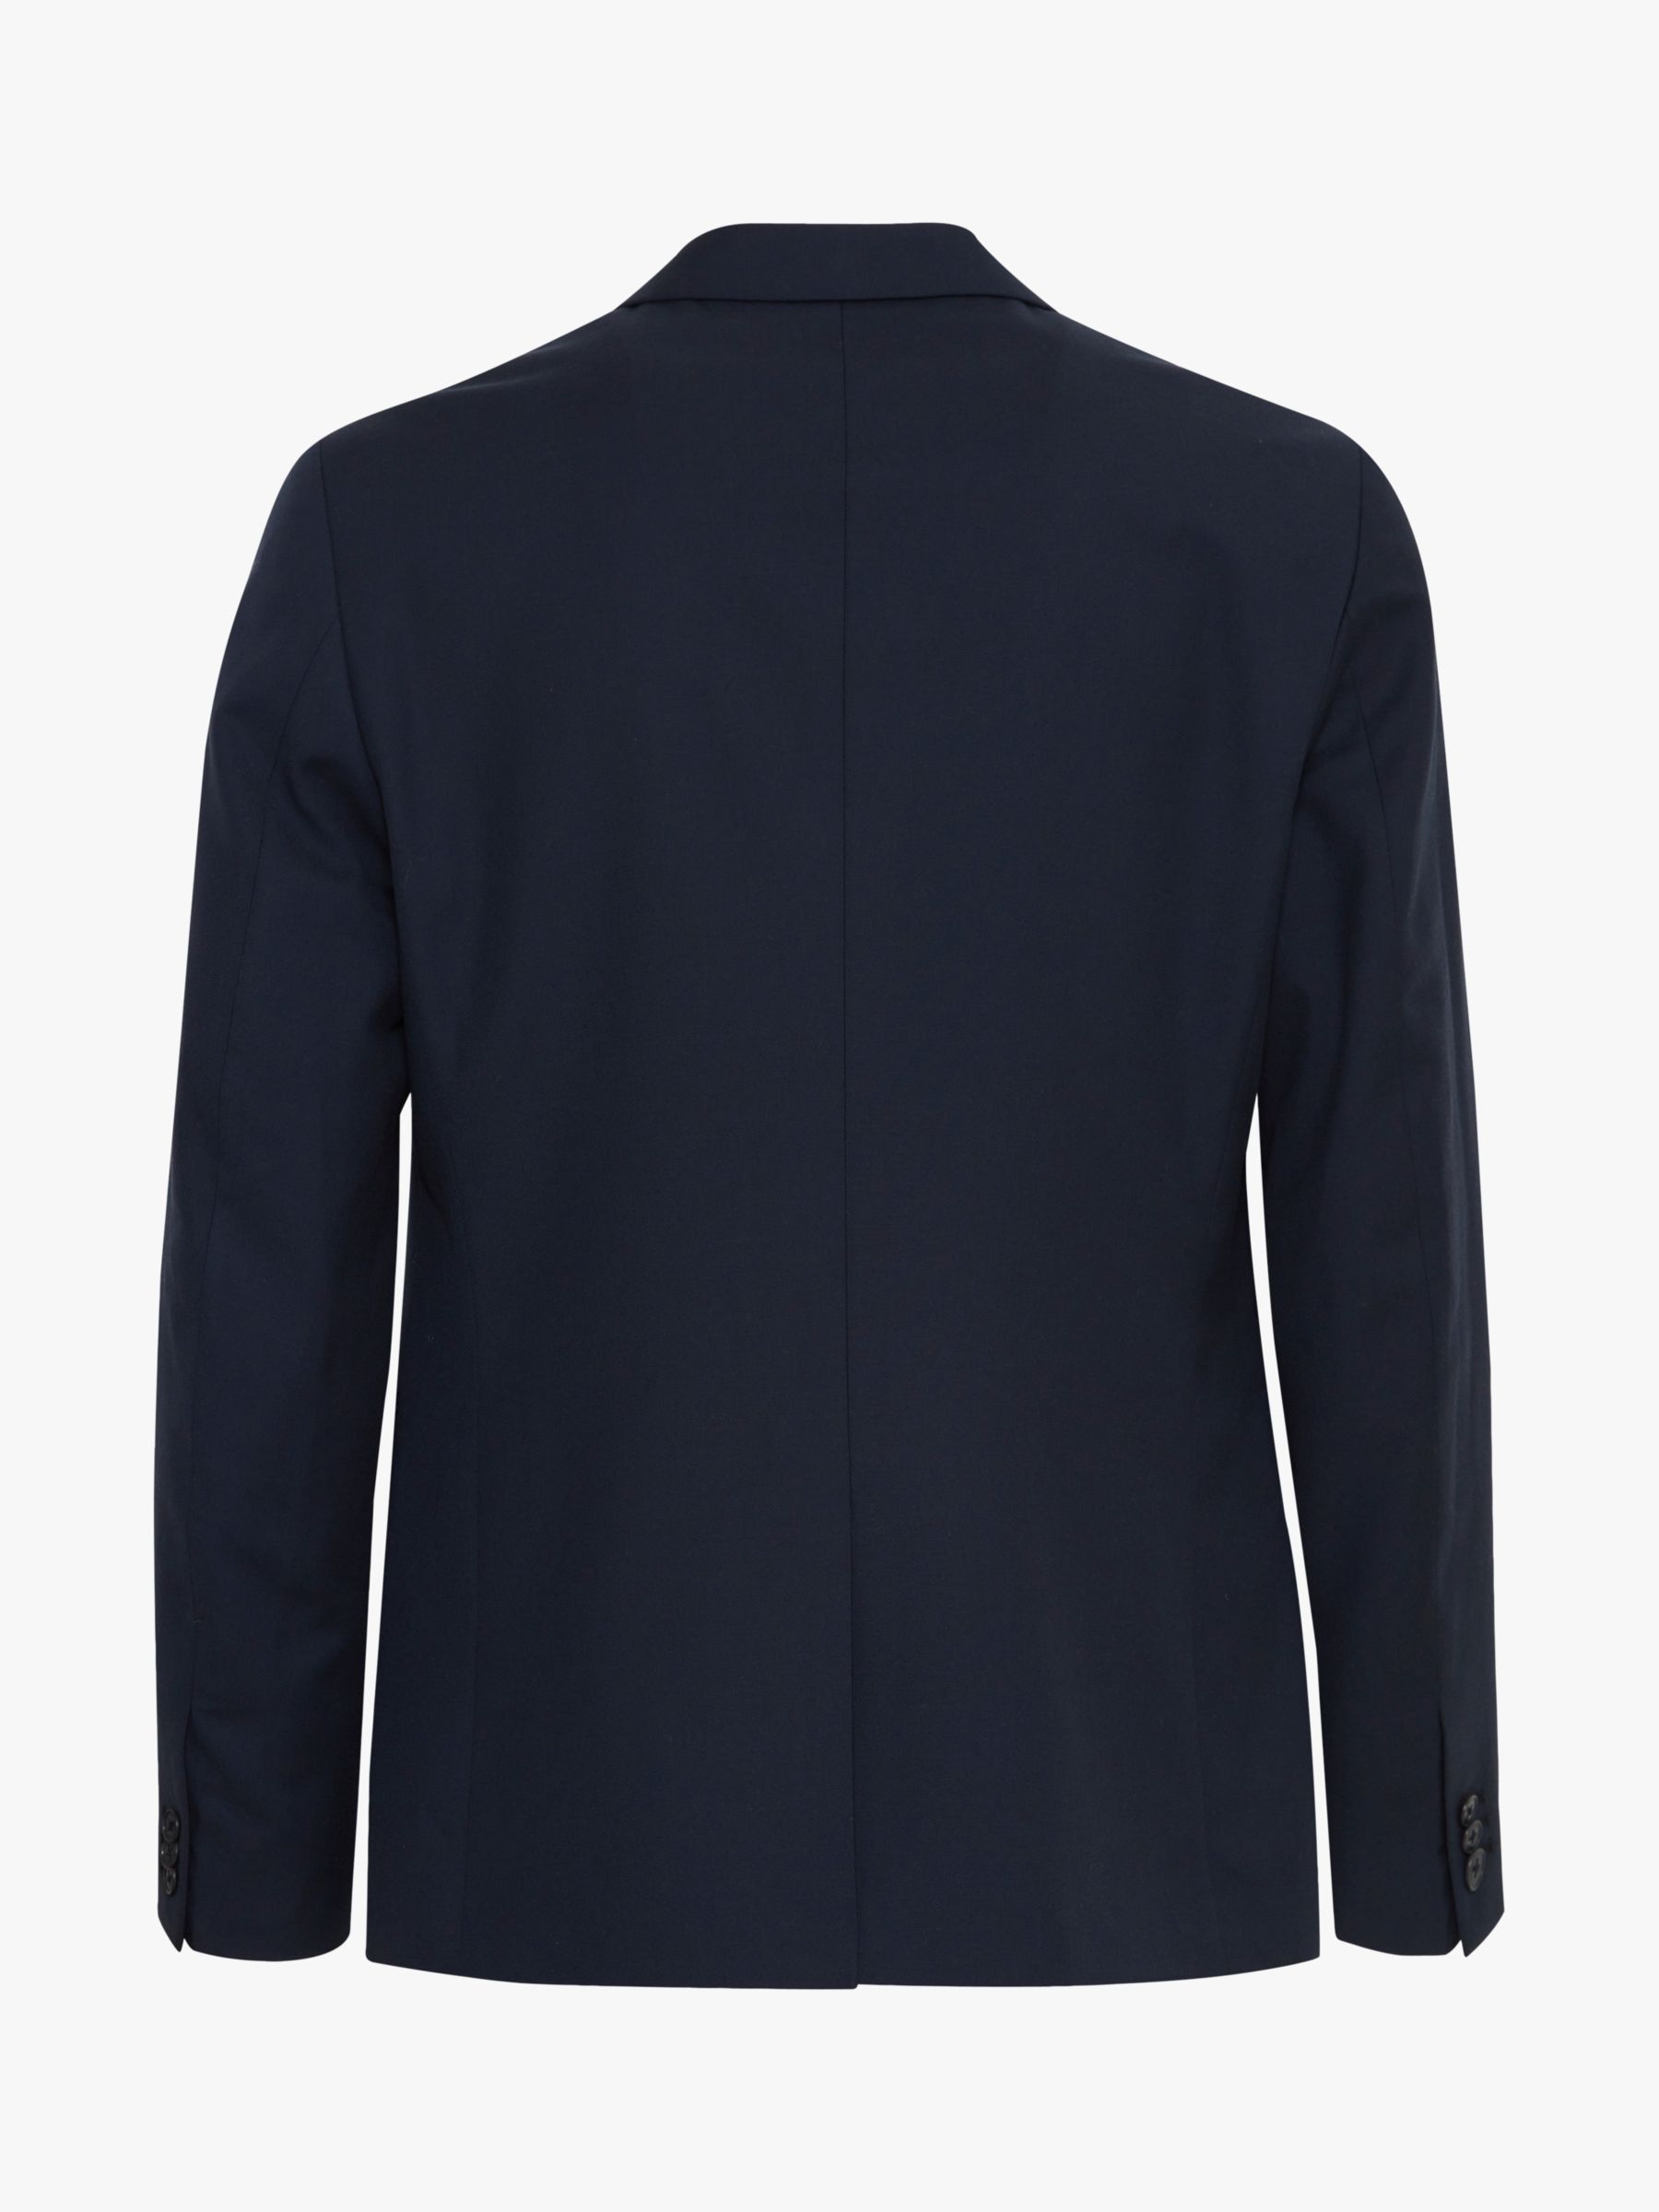 Buy Casual Friday Bille Tailored Single Breasted Blazer, Dark Navy Online at johnlewis.com